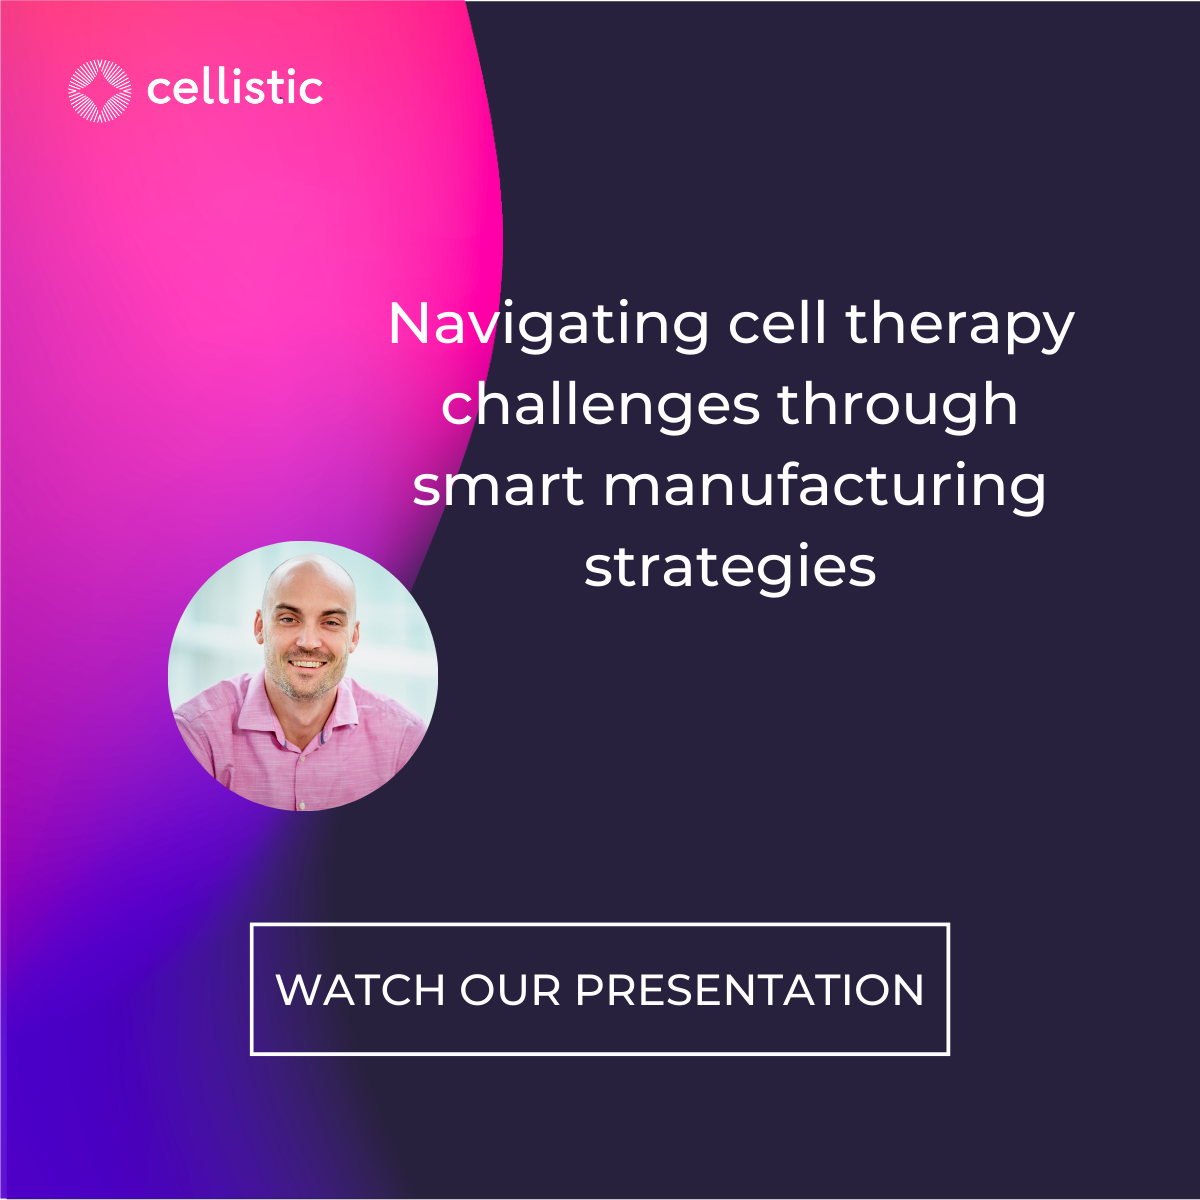 Unlocking the possibilities of cell therapy by smartly overcoming challenges in manufacturing